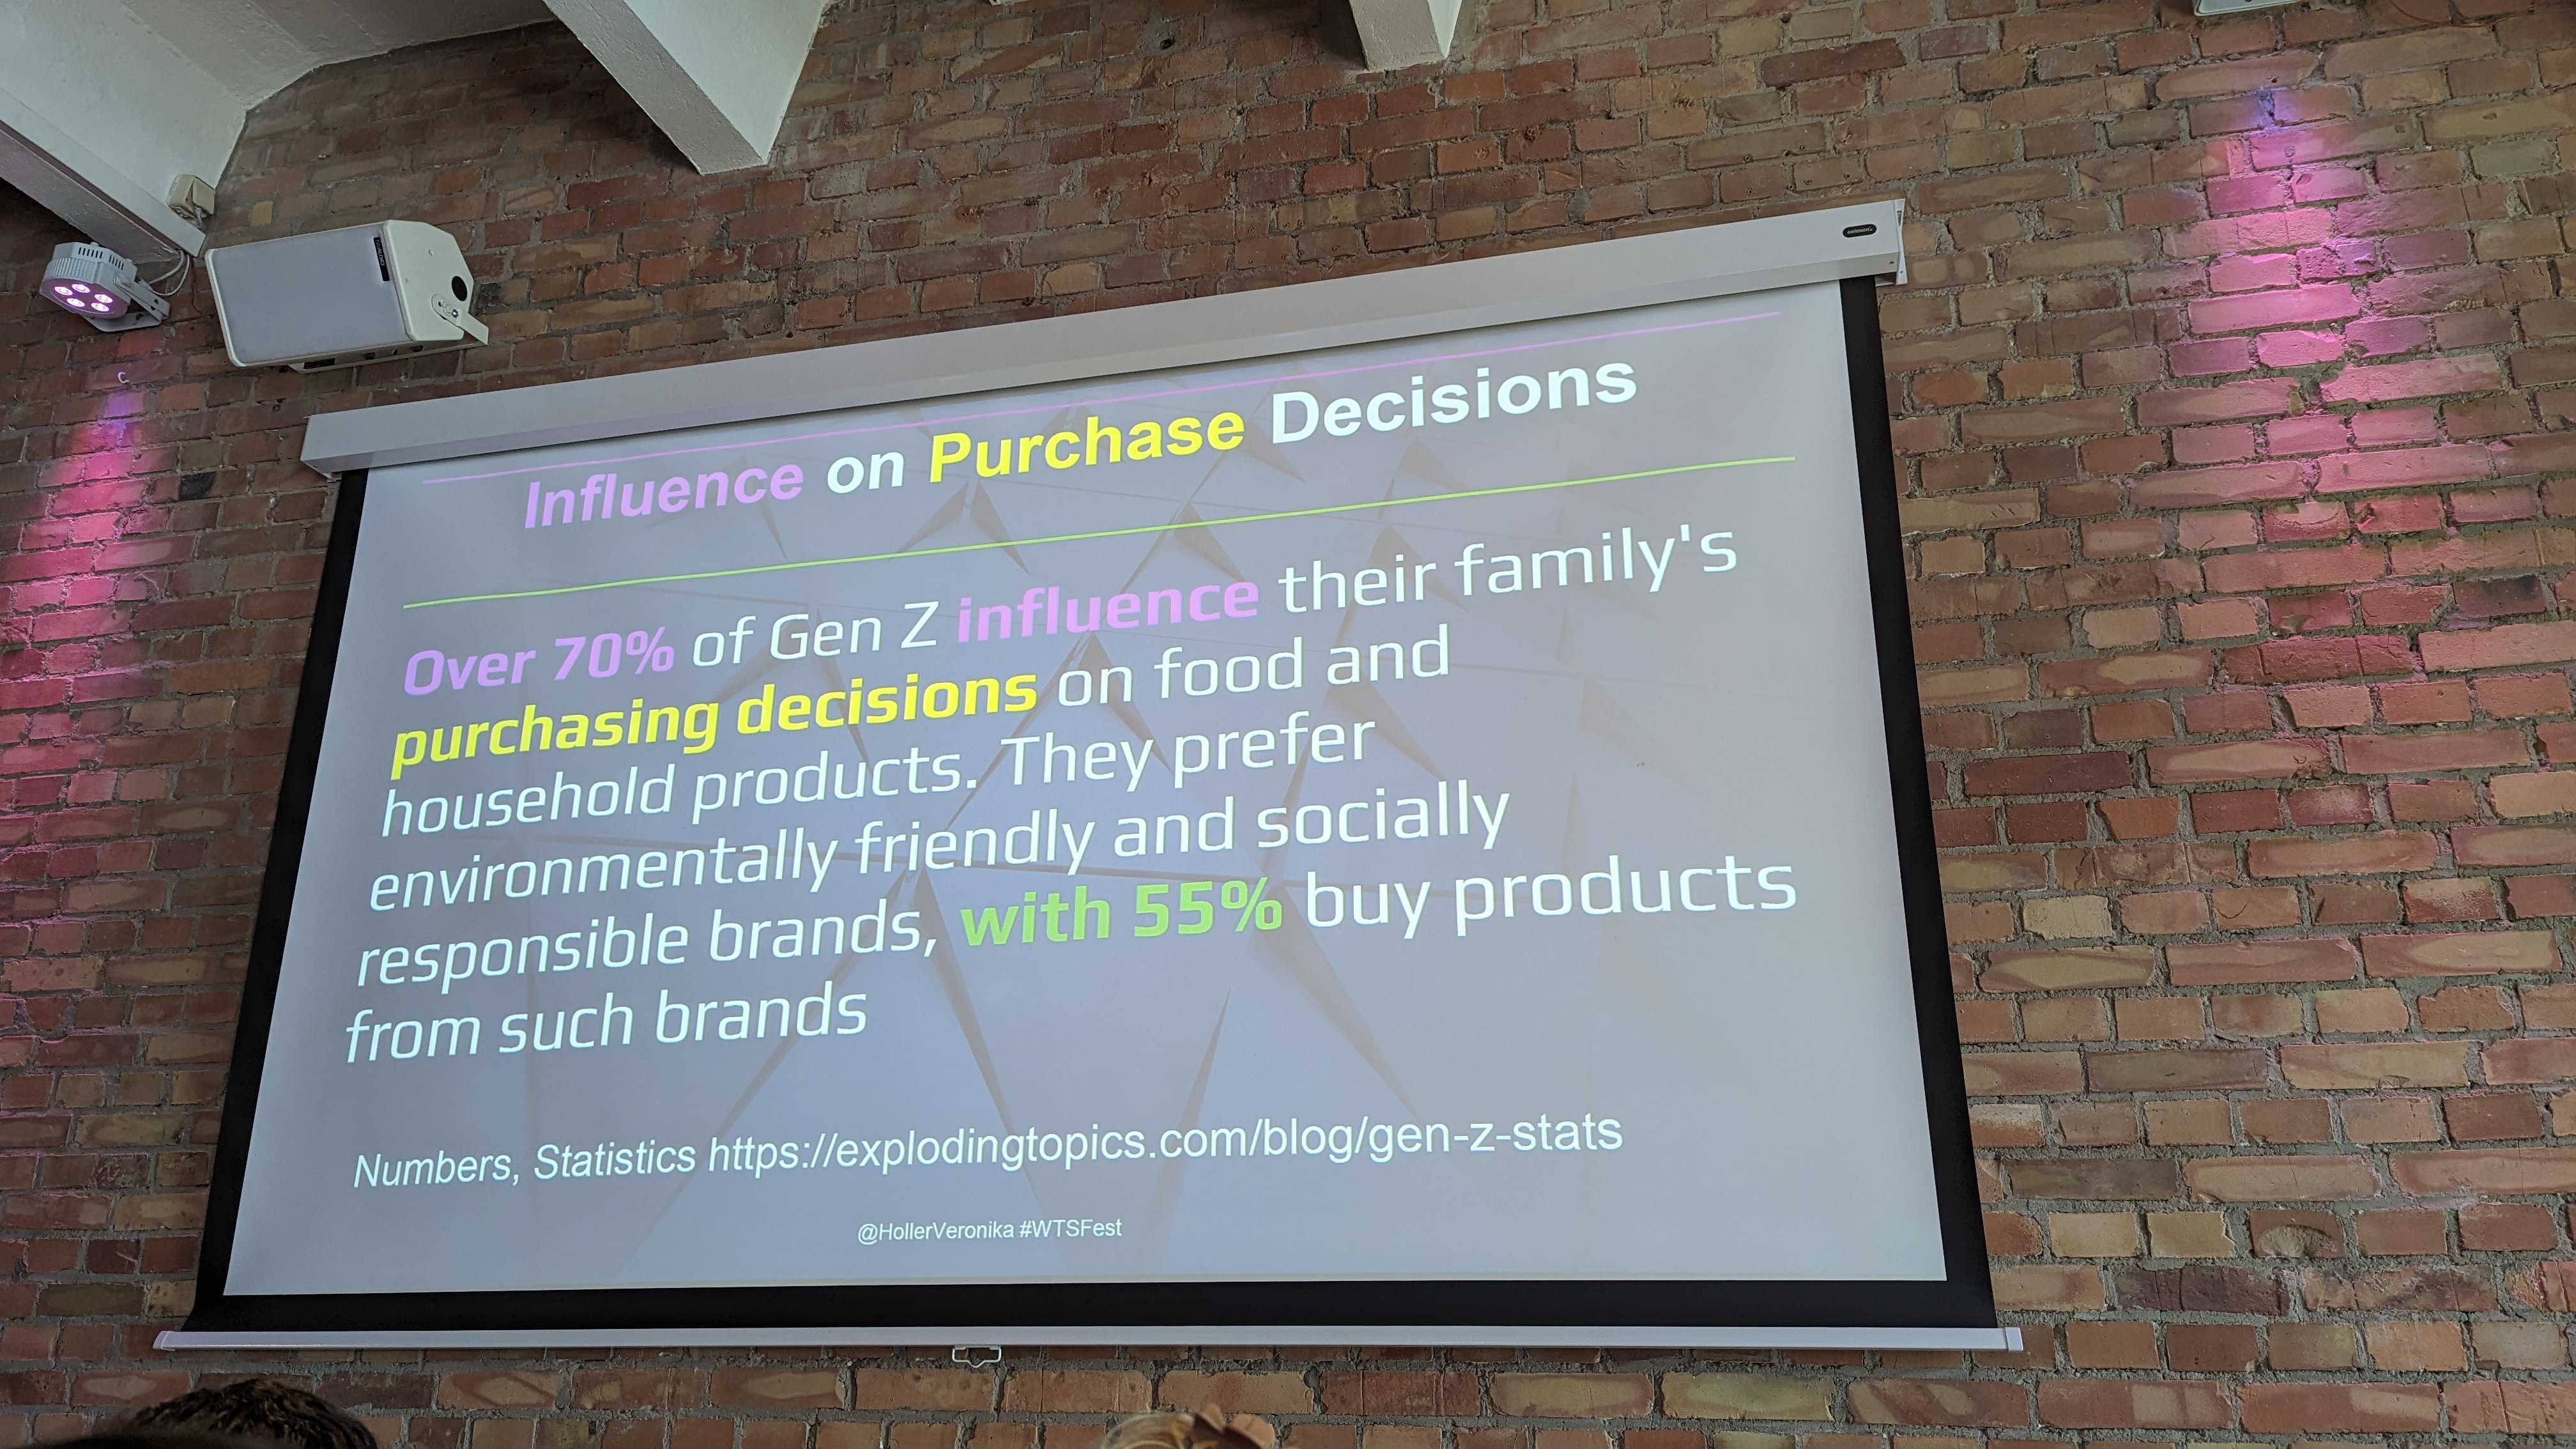 Gemauerte Wand, mit einer Leinwand und Präsentation. Die Präsentation zeigt ein Zitat: "Influence pn Purchase Decisions: Over 70% of Gen Z influence their family's household products. They prefer environmentally friendly and socially responsible brands, with 55% buy products from such brands. 